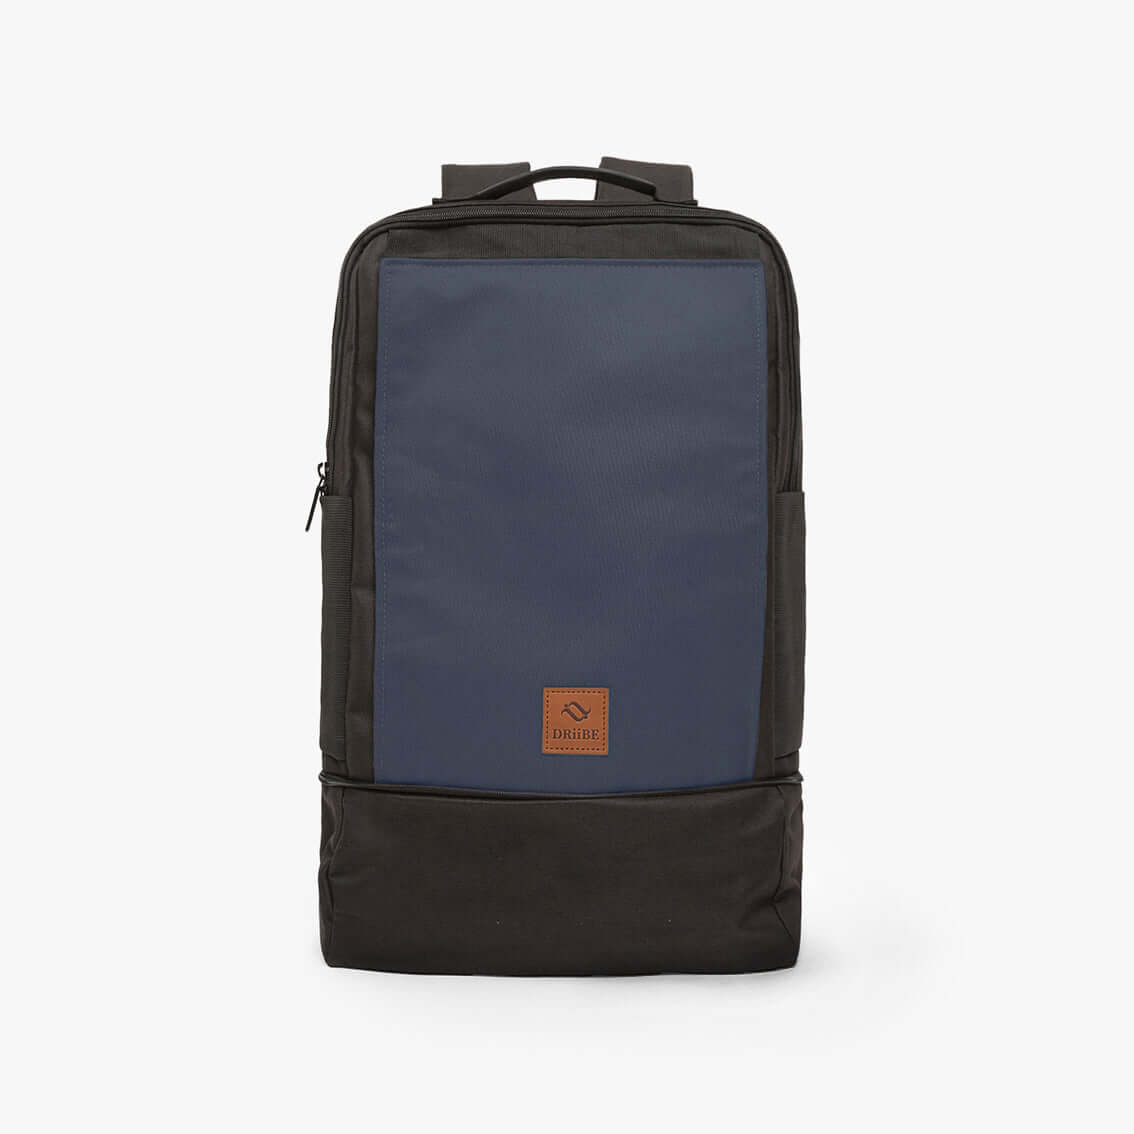 CITYC Laptop 2 in 1 Backpack Navy Blue